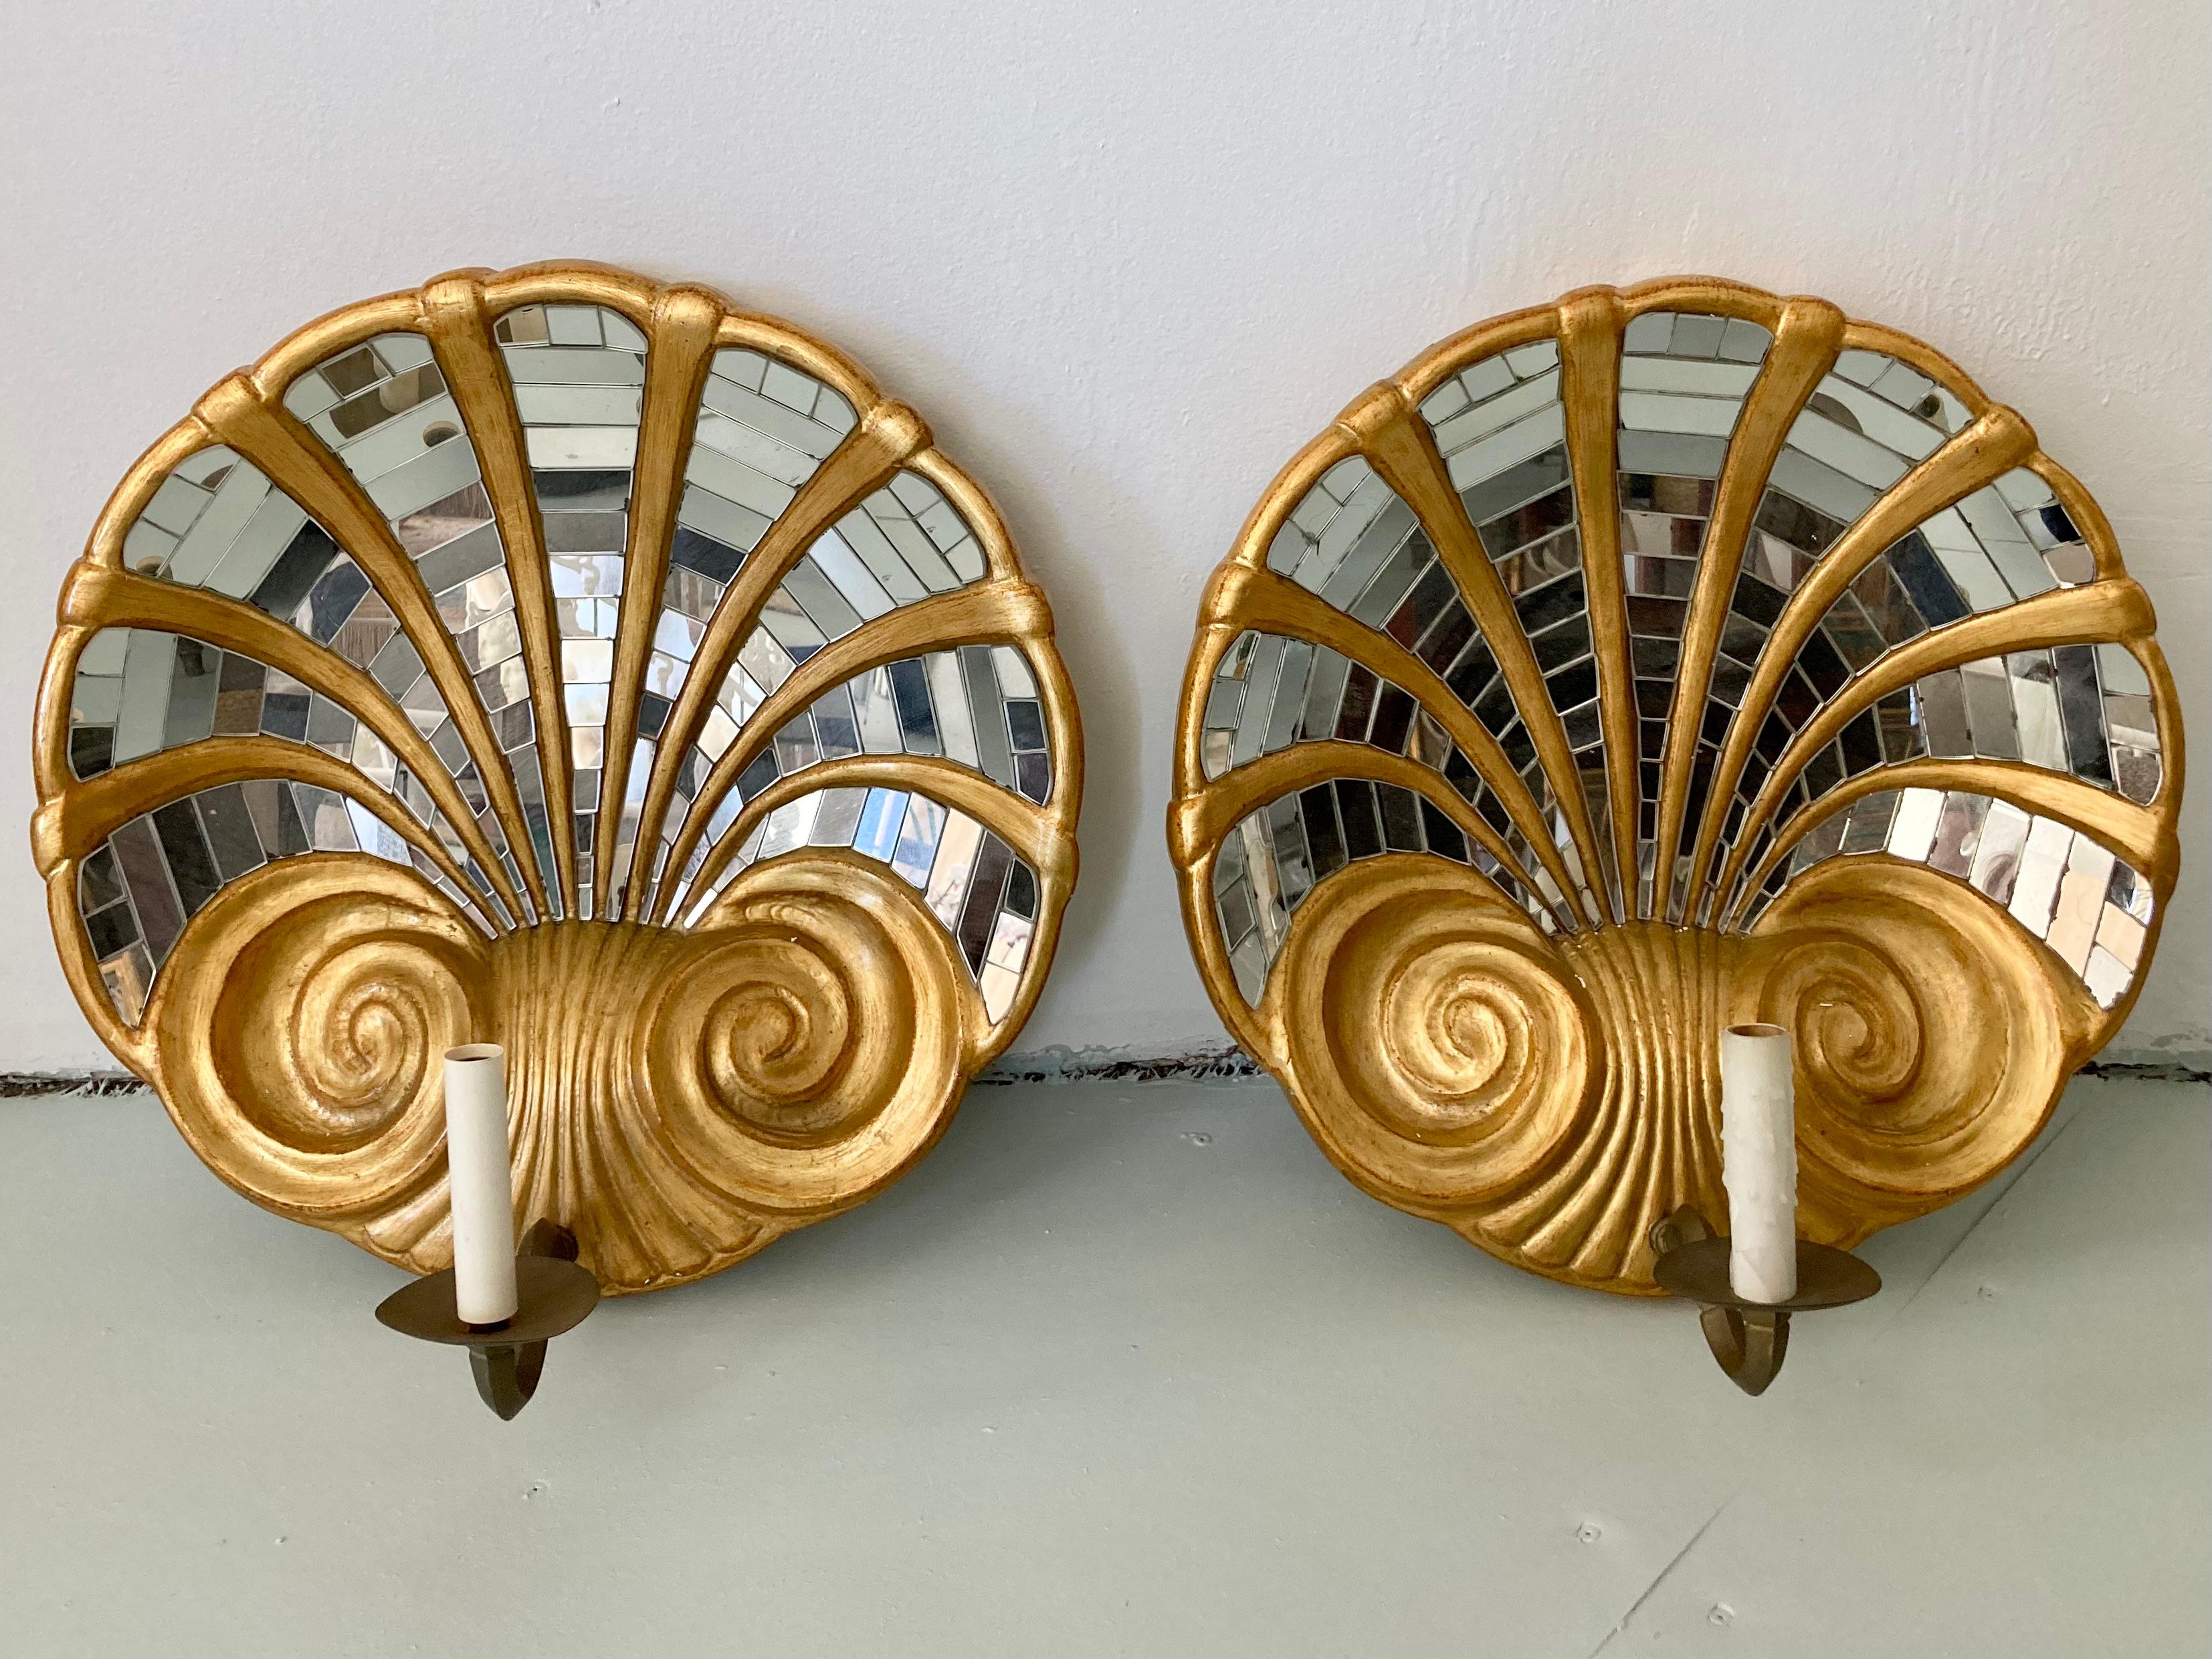 Fabulous pair of Serge Roche wall sconces. Great designing details on these pieces.